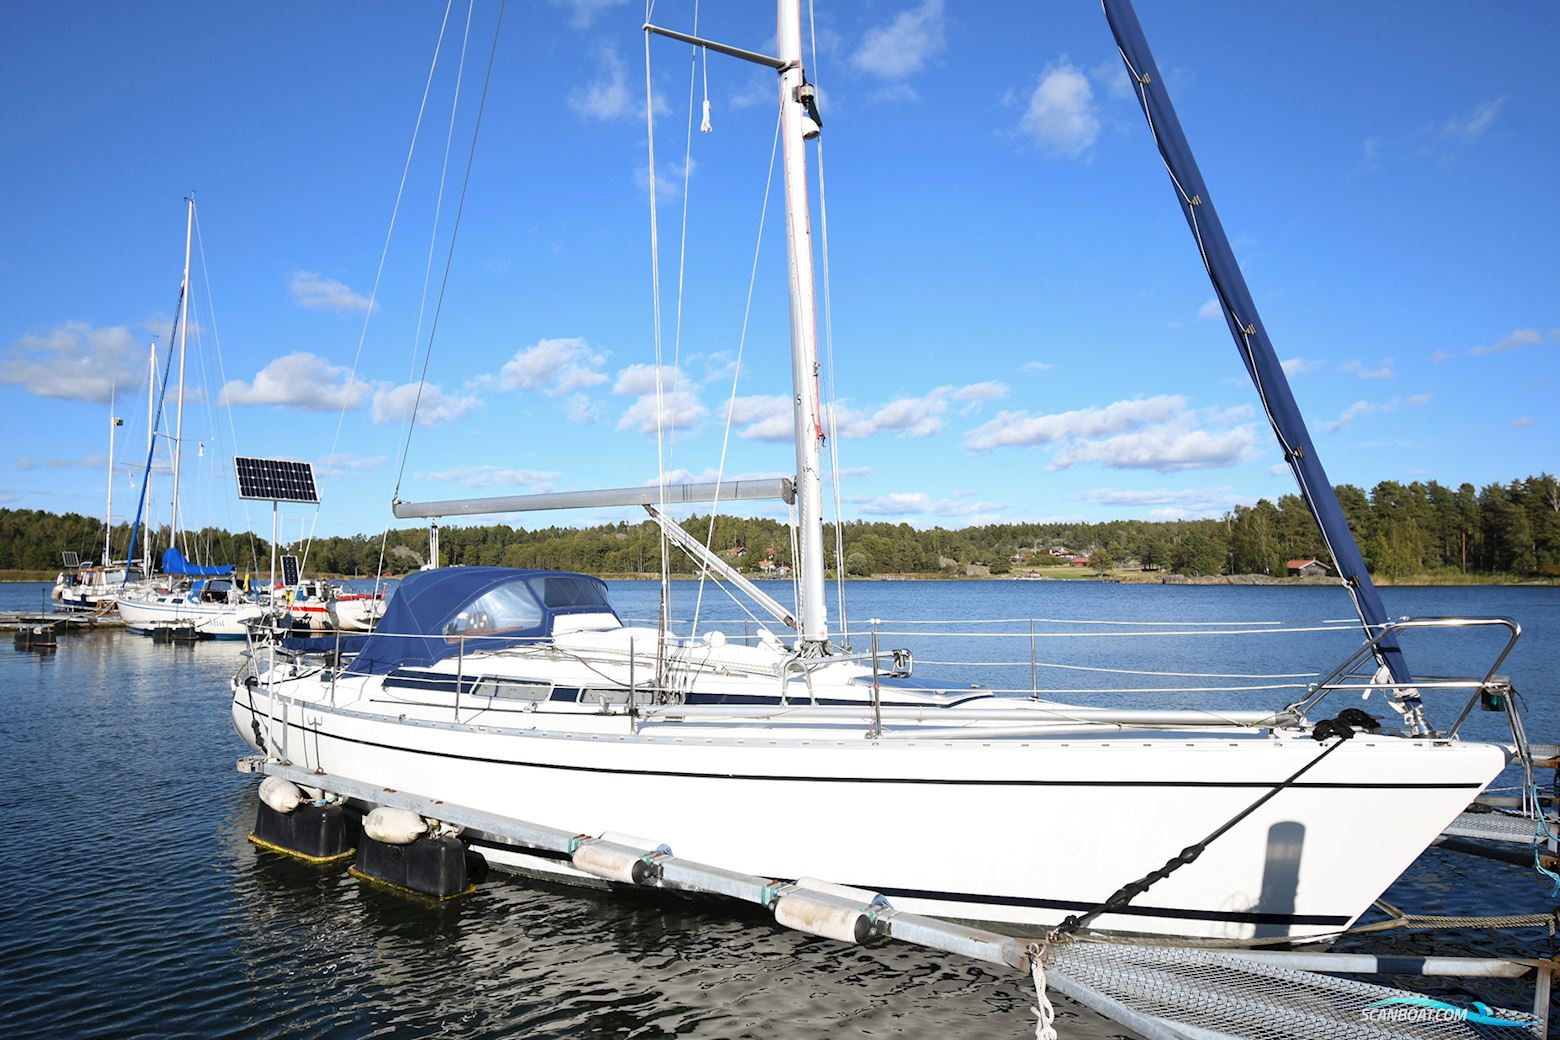 Arcona Arcona 355 Sailing boat 1990, with Volvo D1-30F, 2008 engine, Sweden